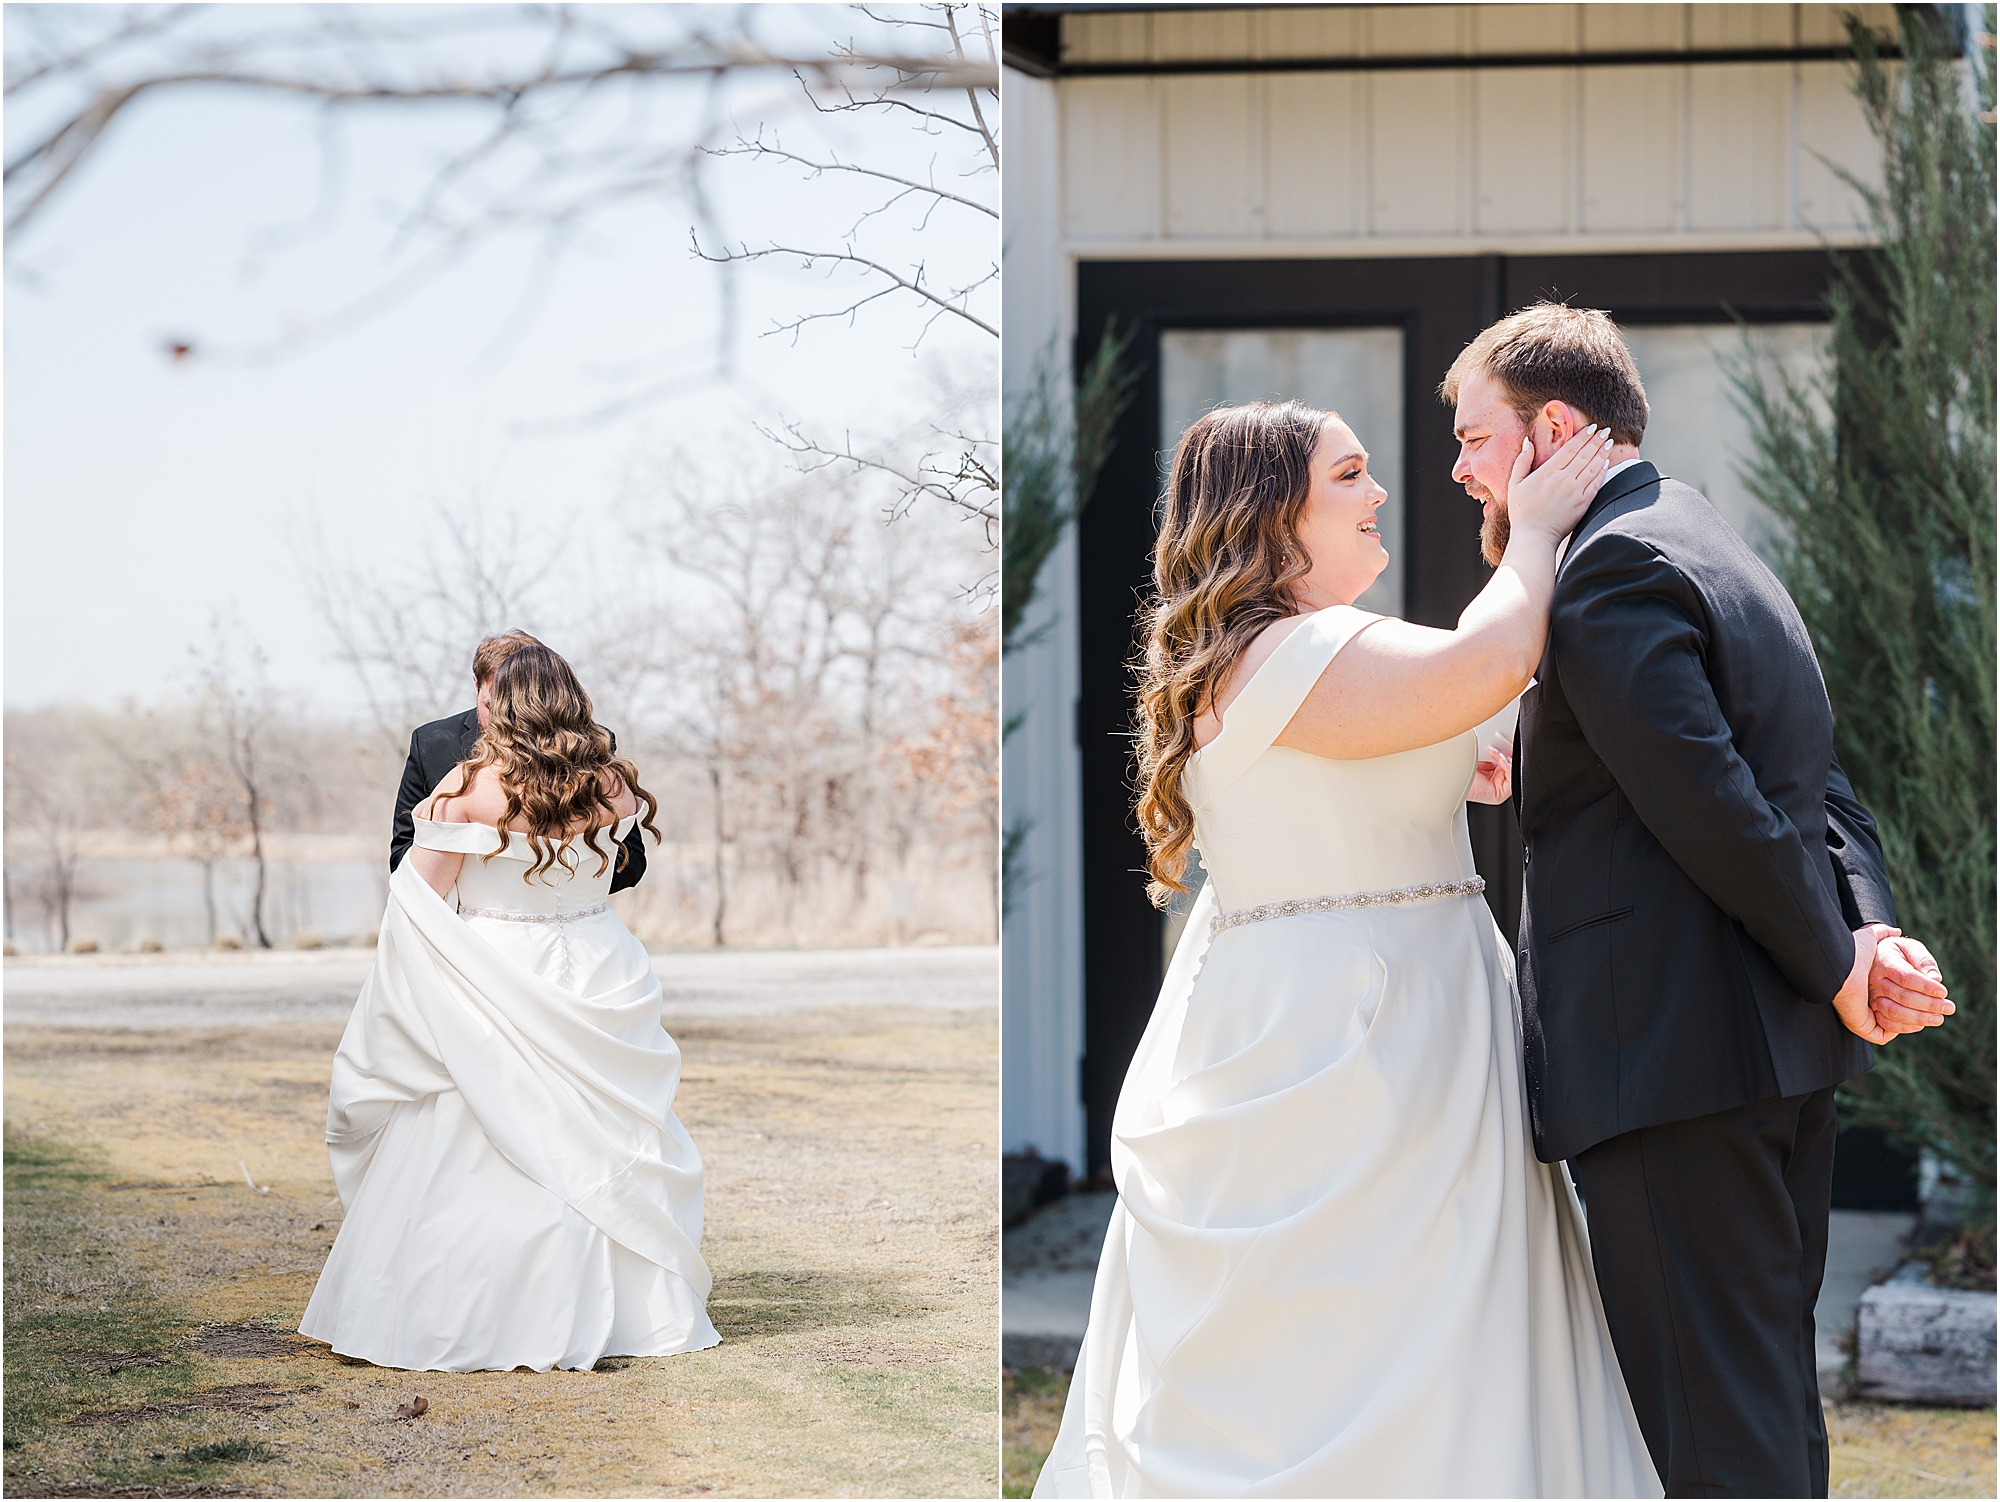 A sweet moment between the. bride and groom at their Dream Point Ranch Wedding.